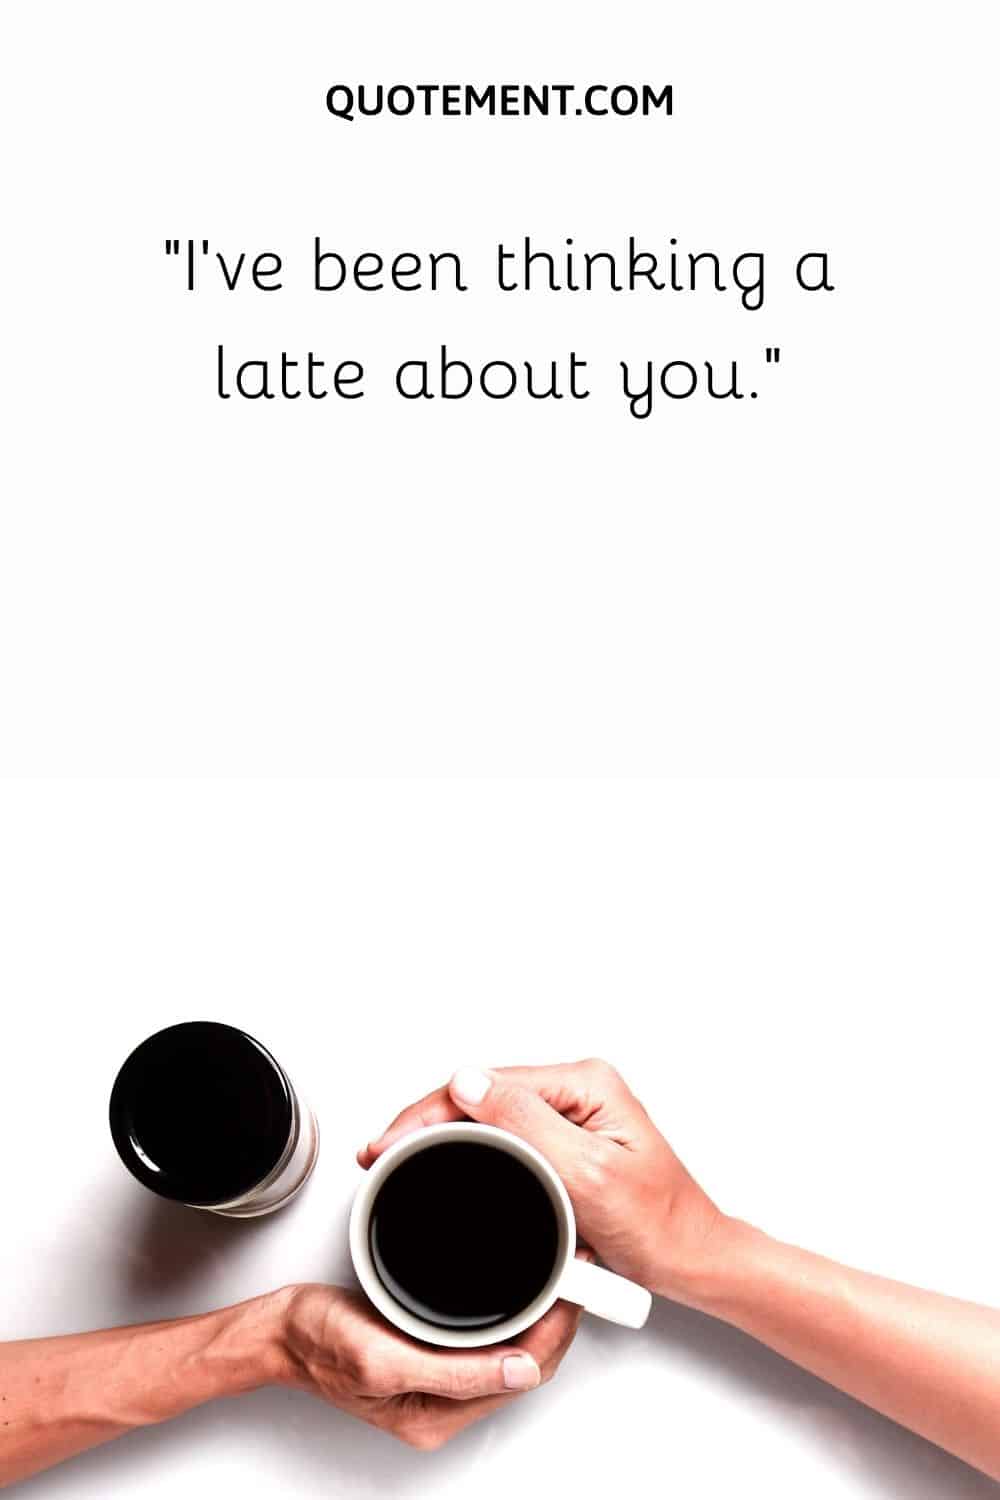 I’ve been thinking a latte about you